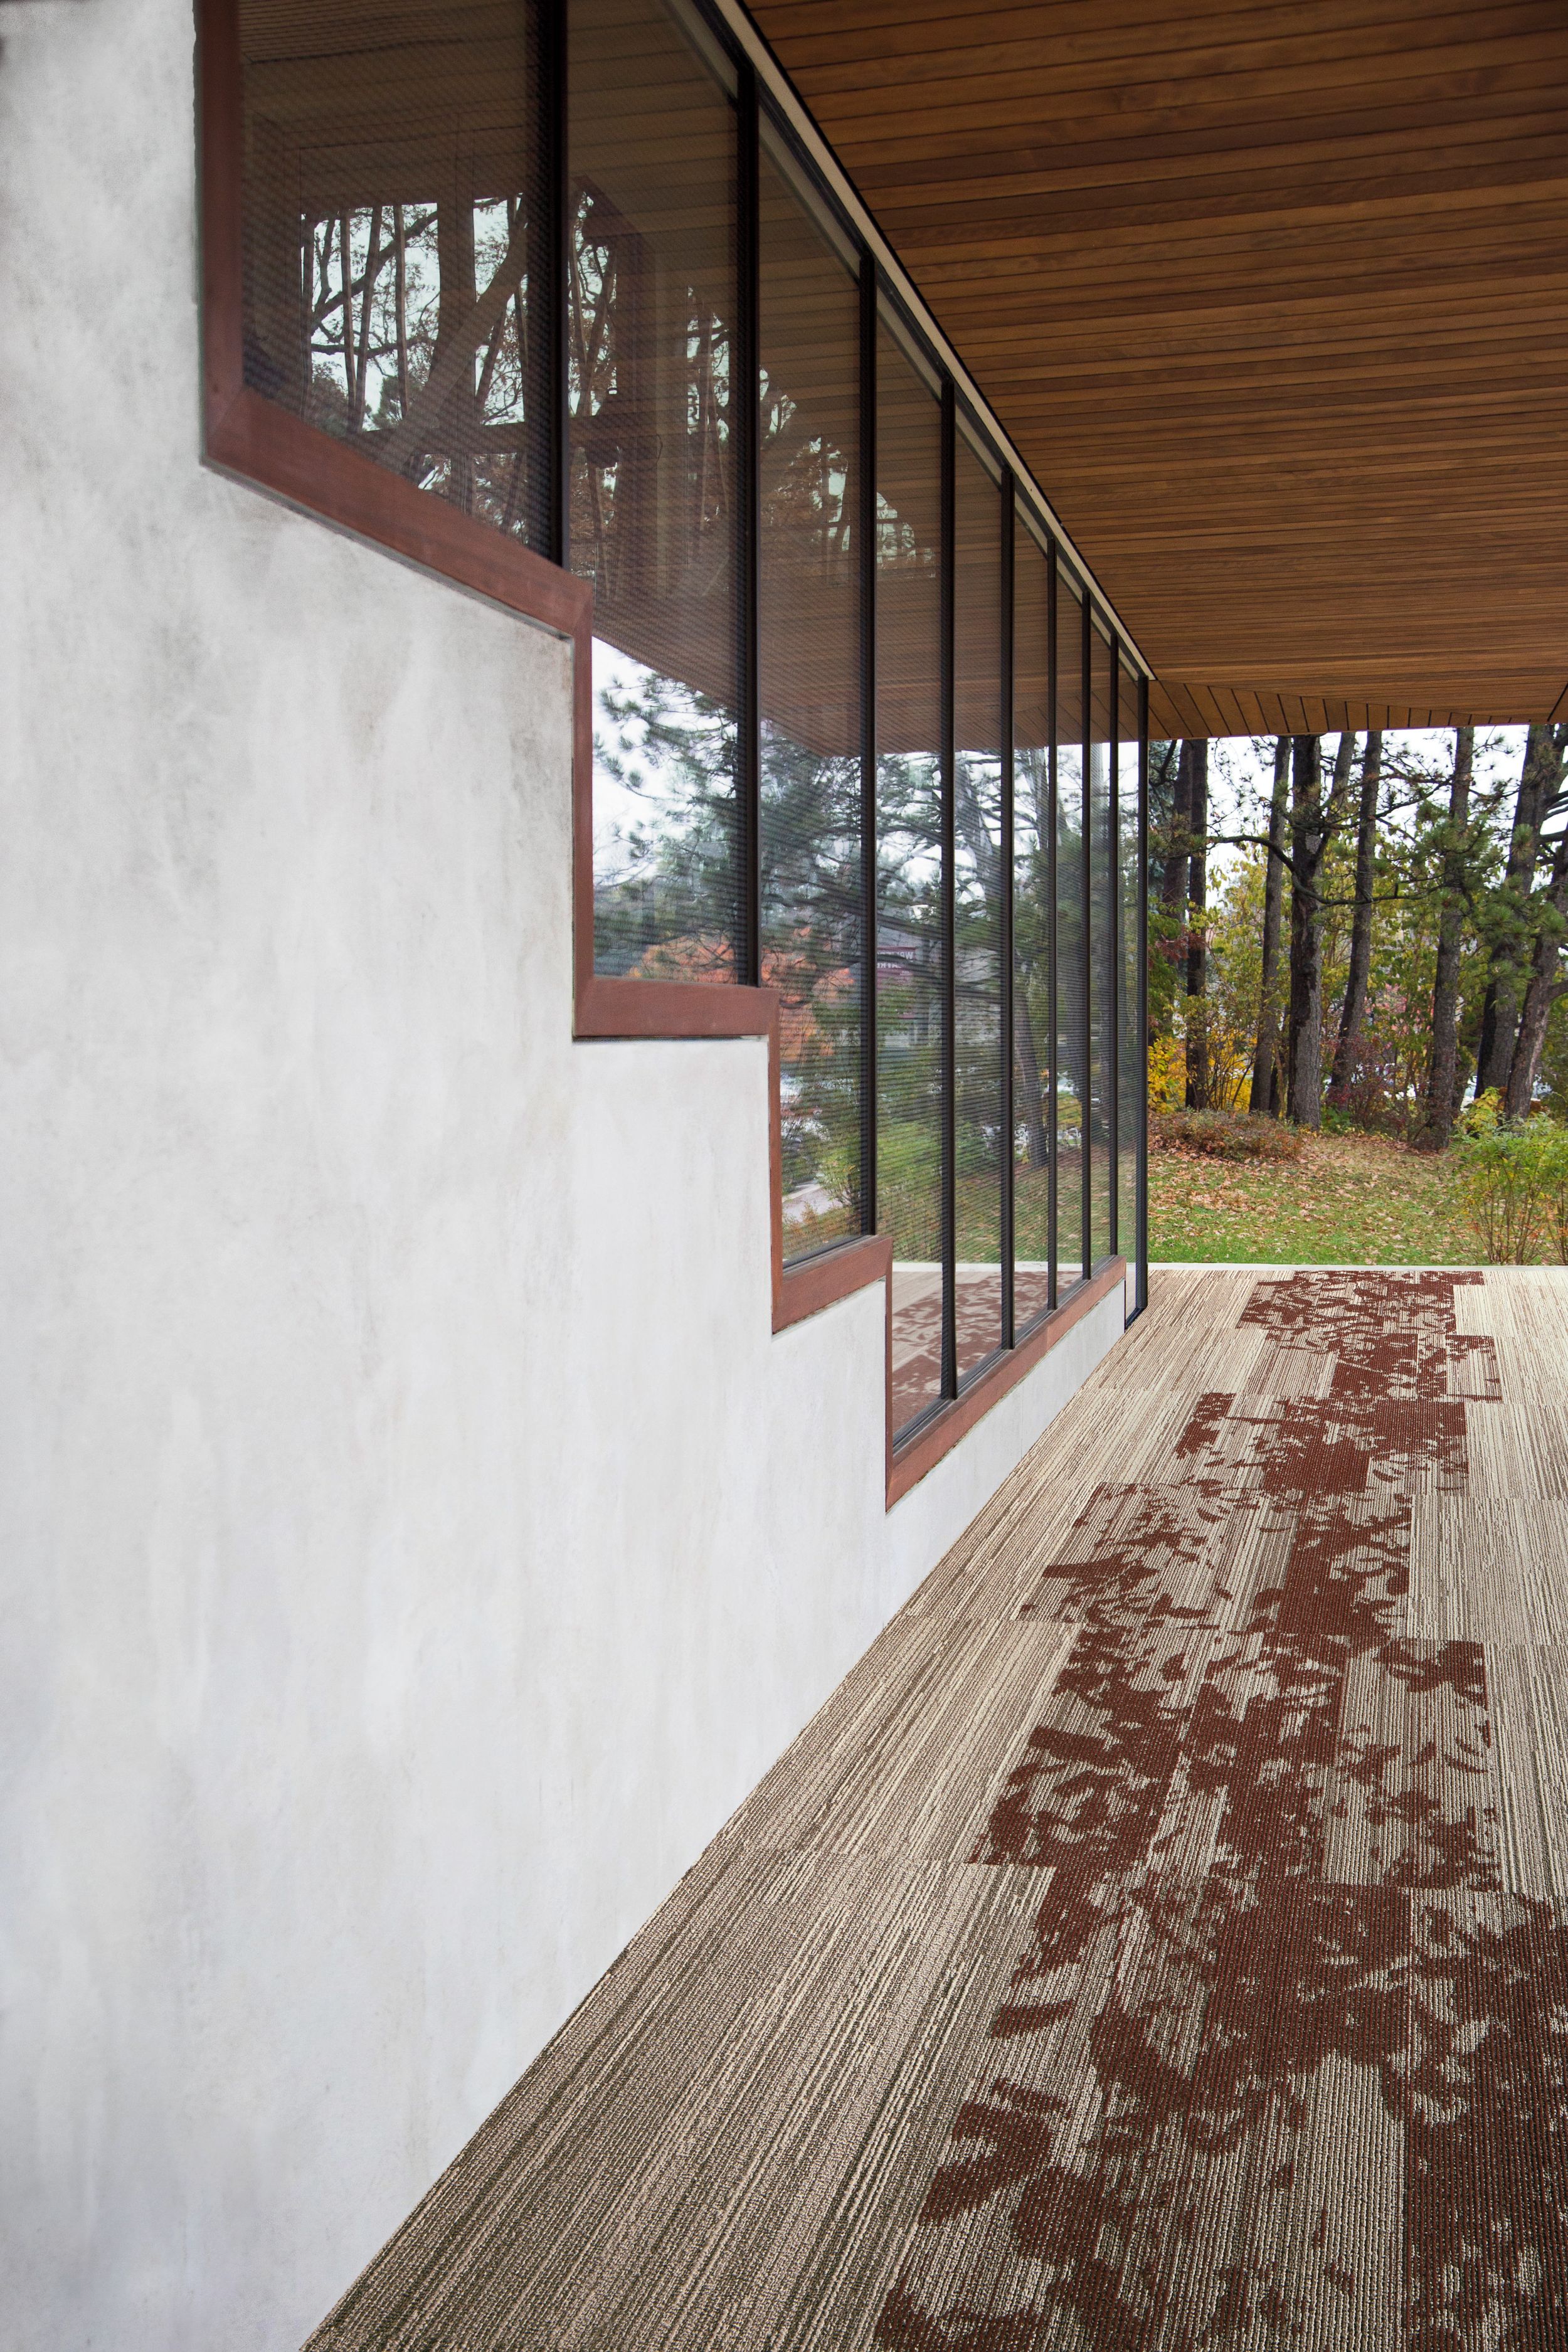 Interface Progression III and Glazing plank carpet tile shown for inspiration in outdoor setting image number 12